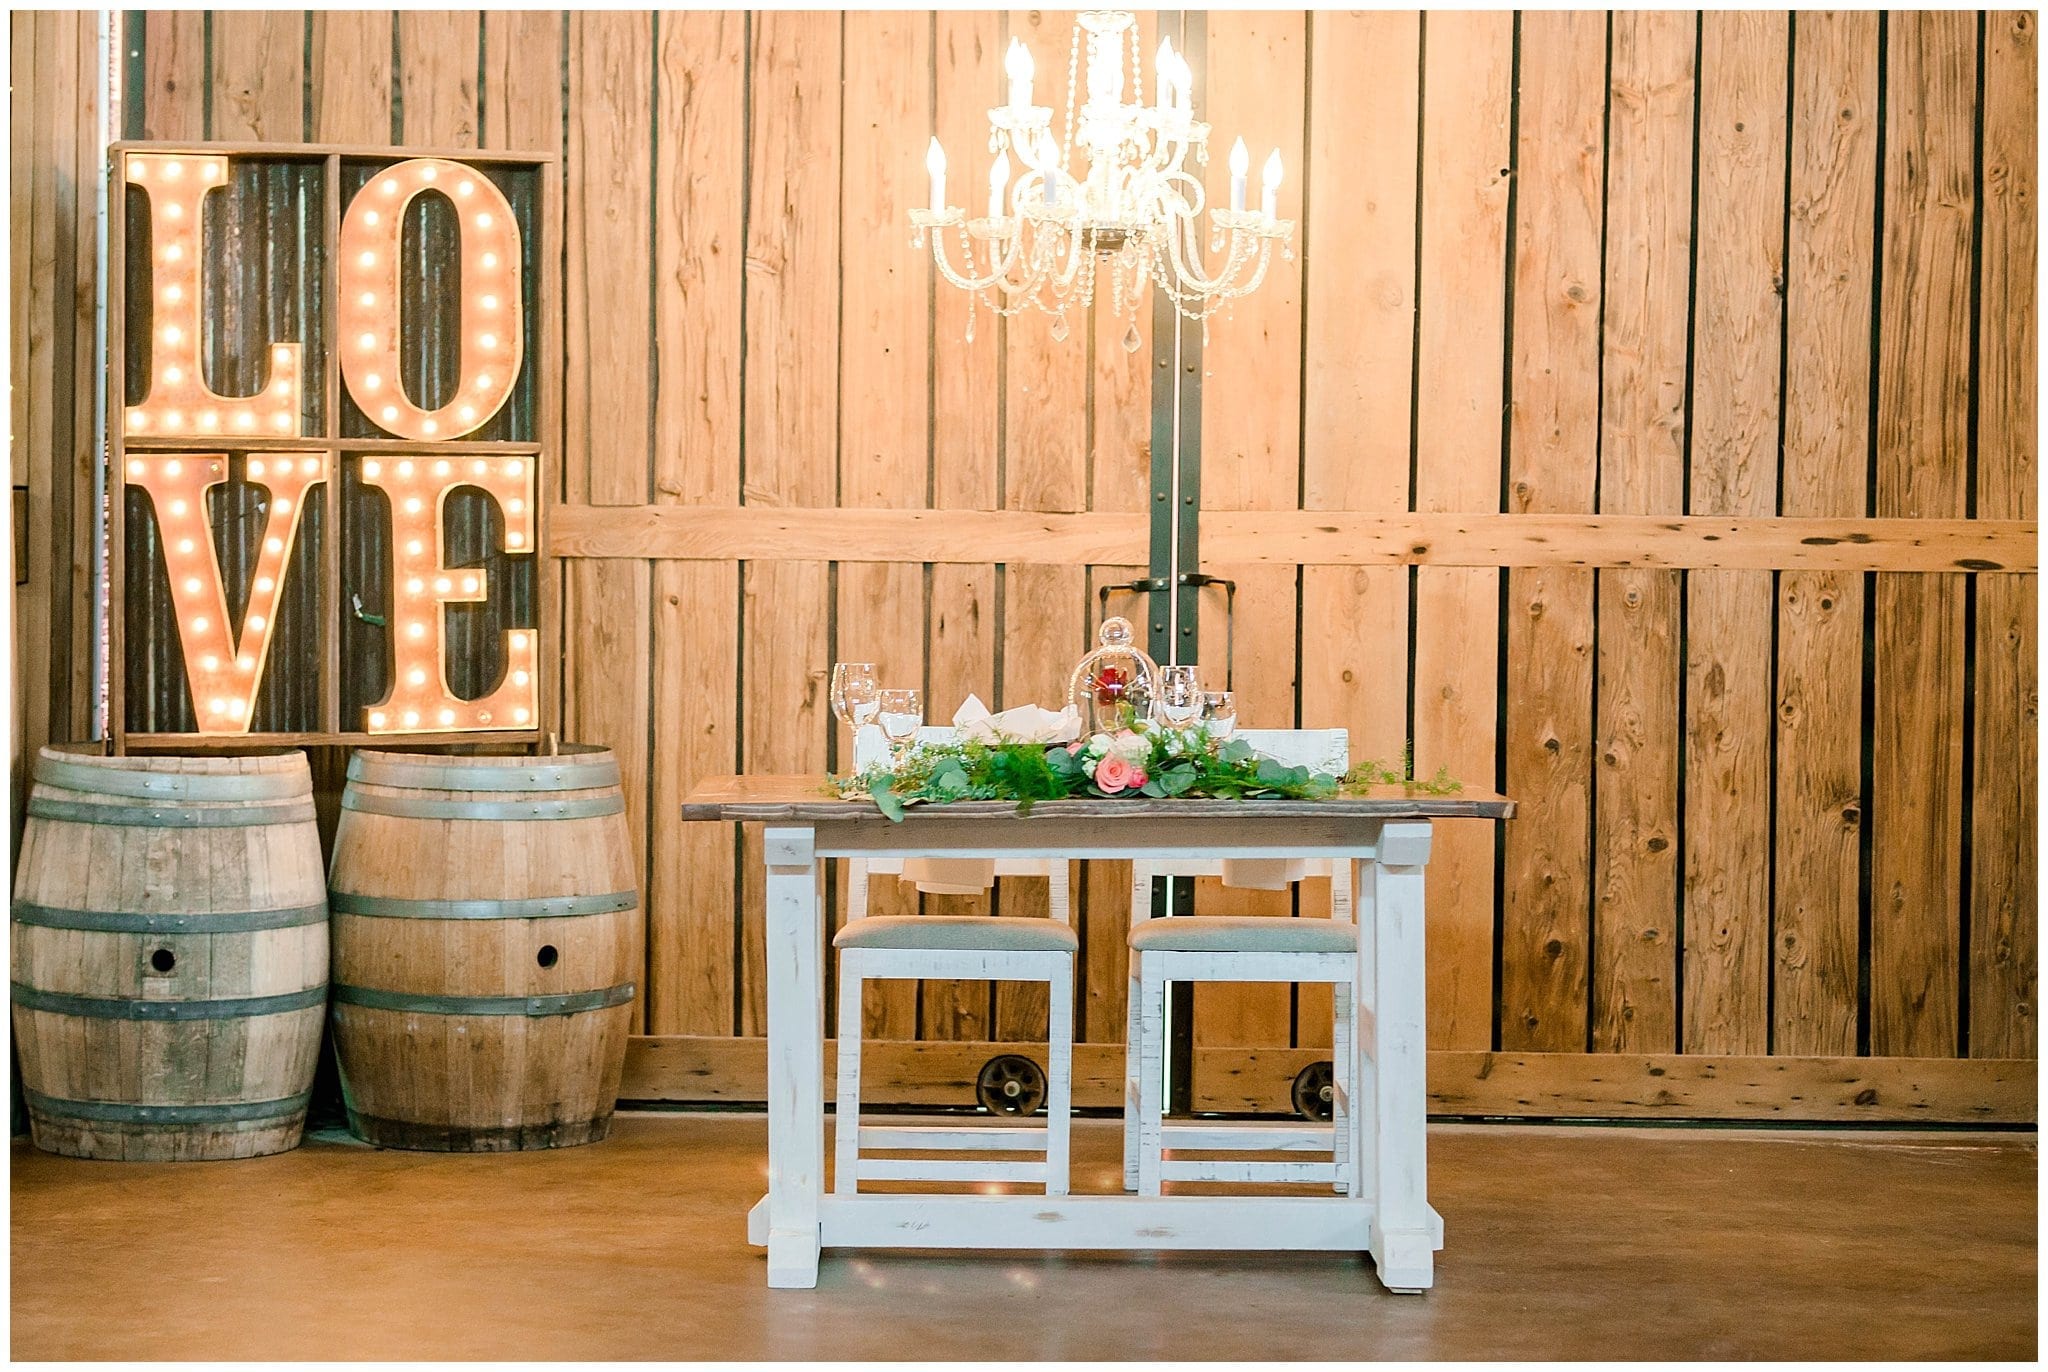 Windmill Winery Barn Table Scape Set Up, Beauty and the Beast Theme